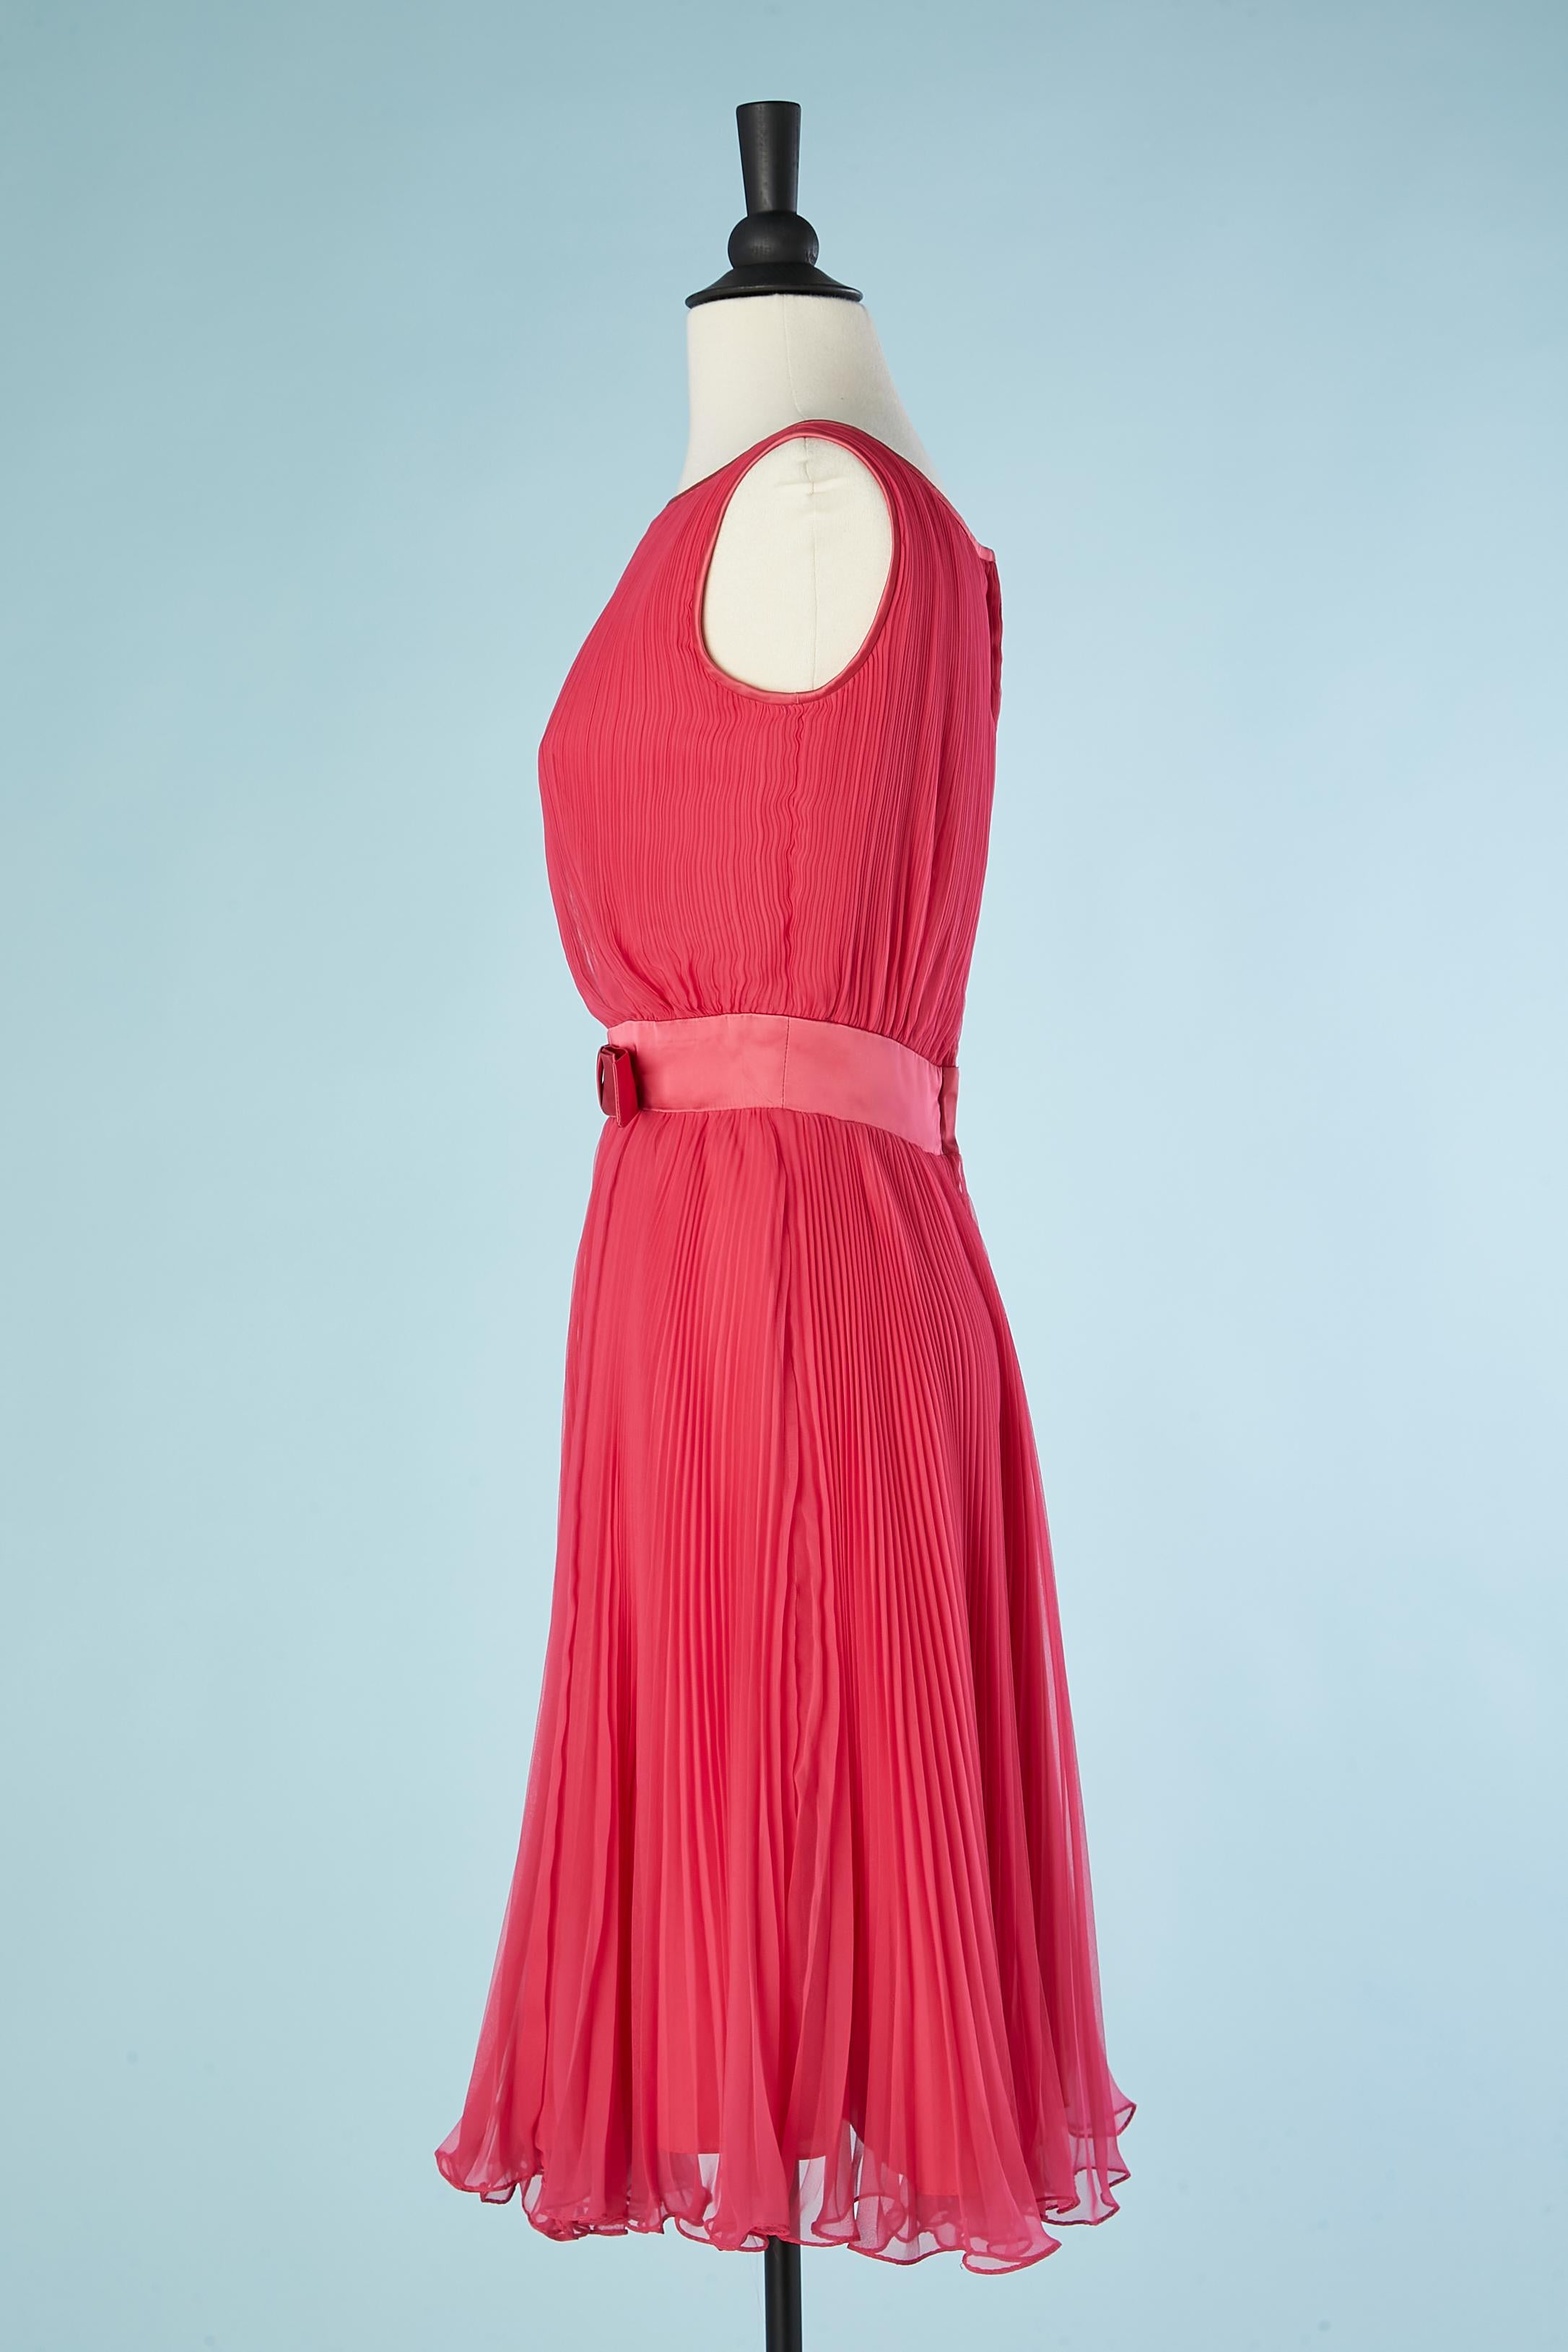 Women's Sunray pleated pink cocktail dress with bow  Miss Eliette Circa 1960's  For Sale